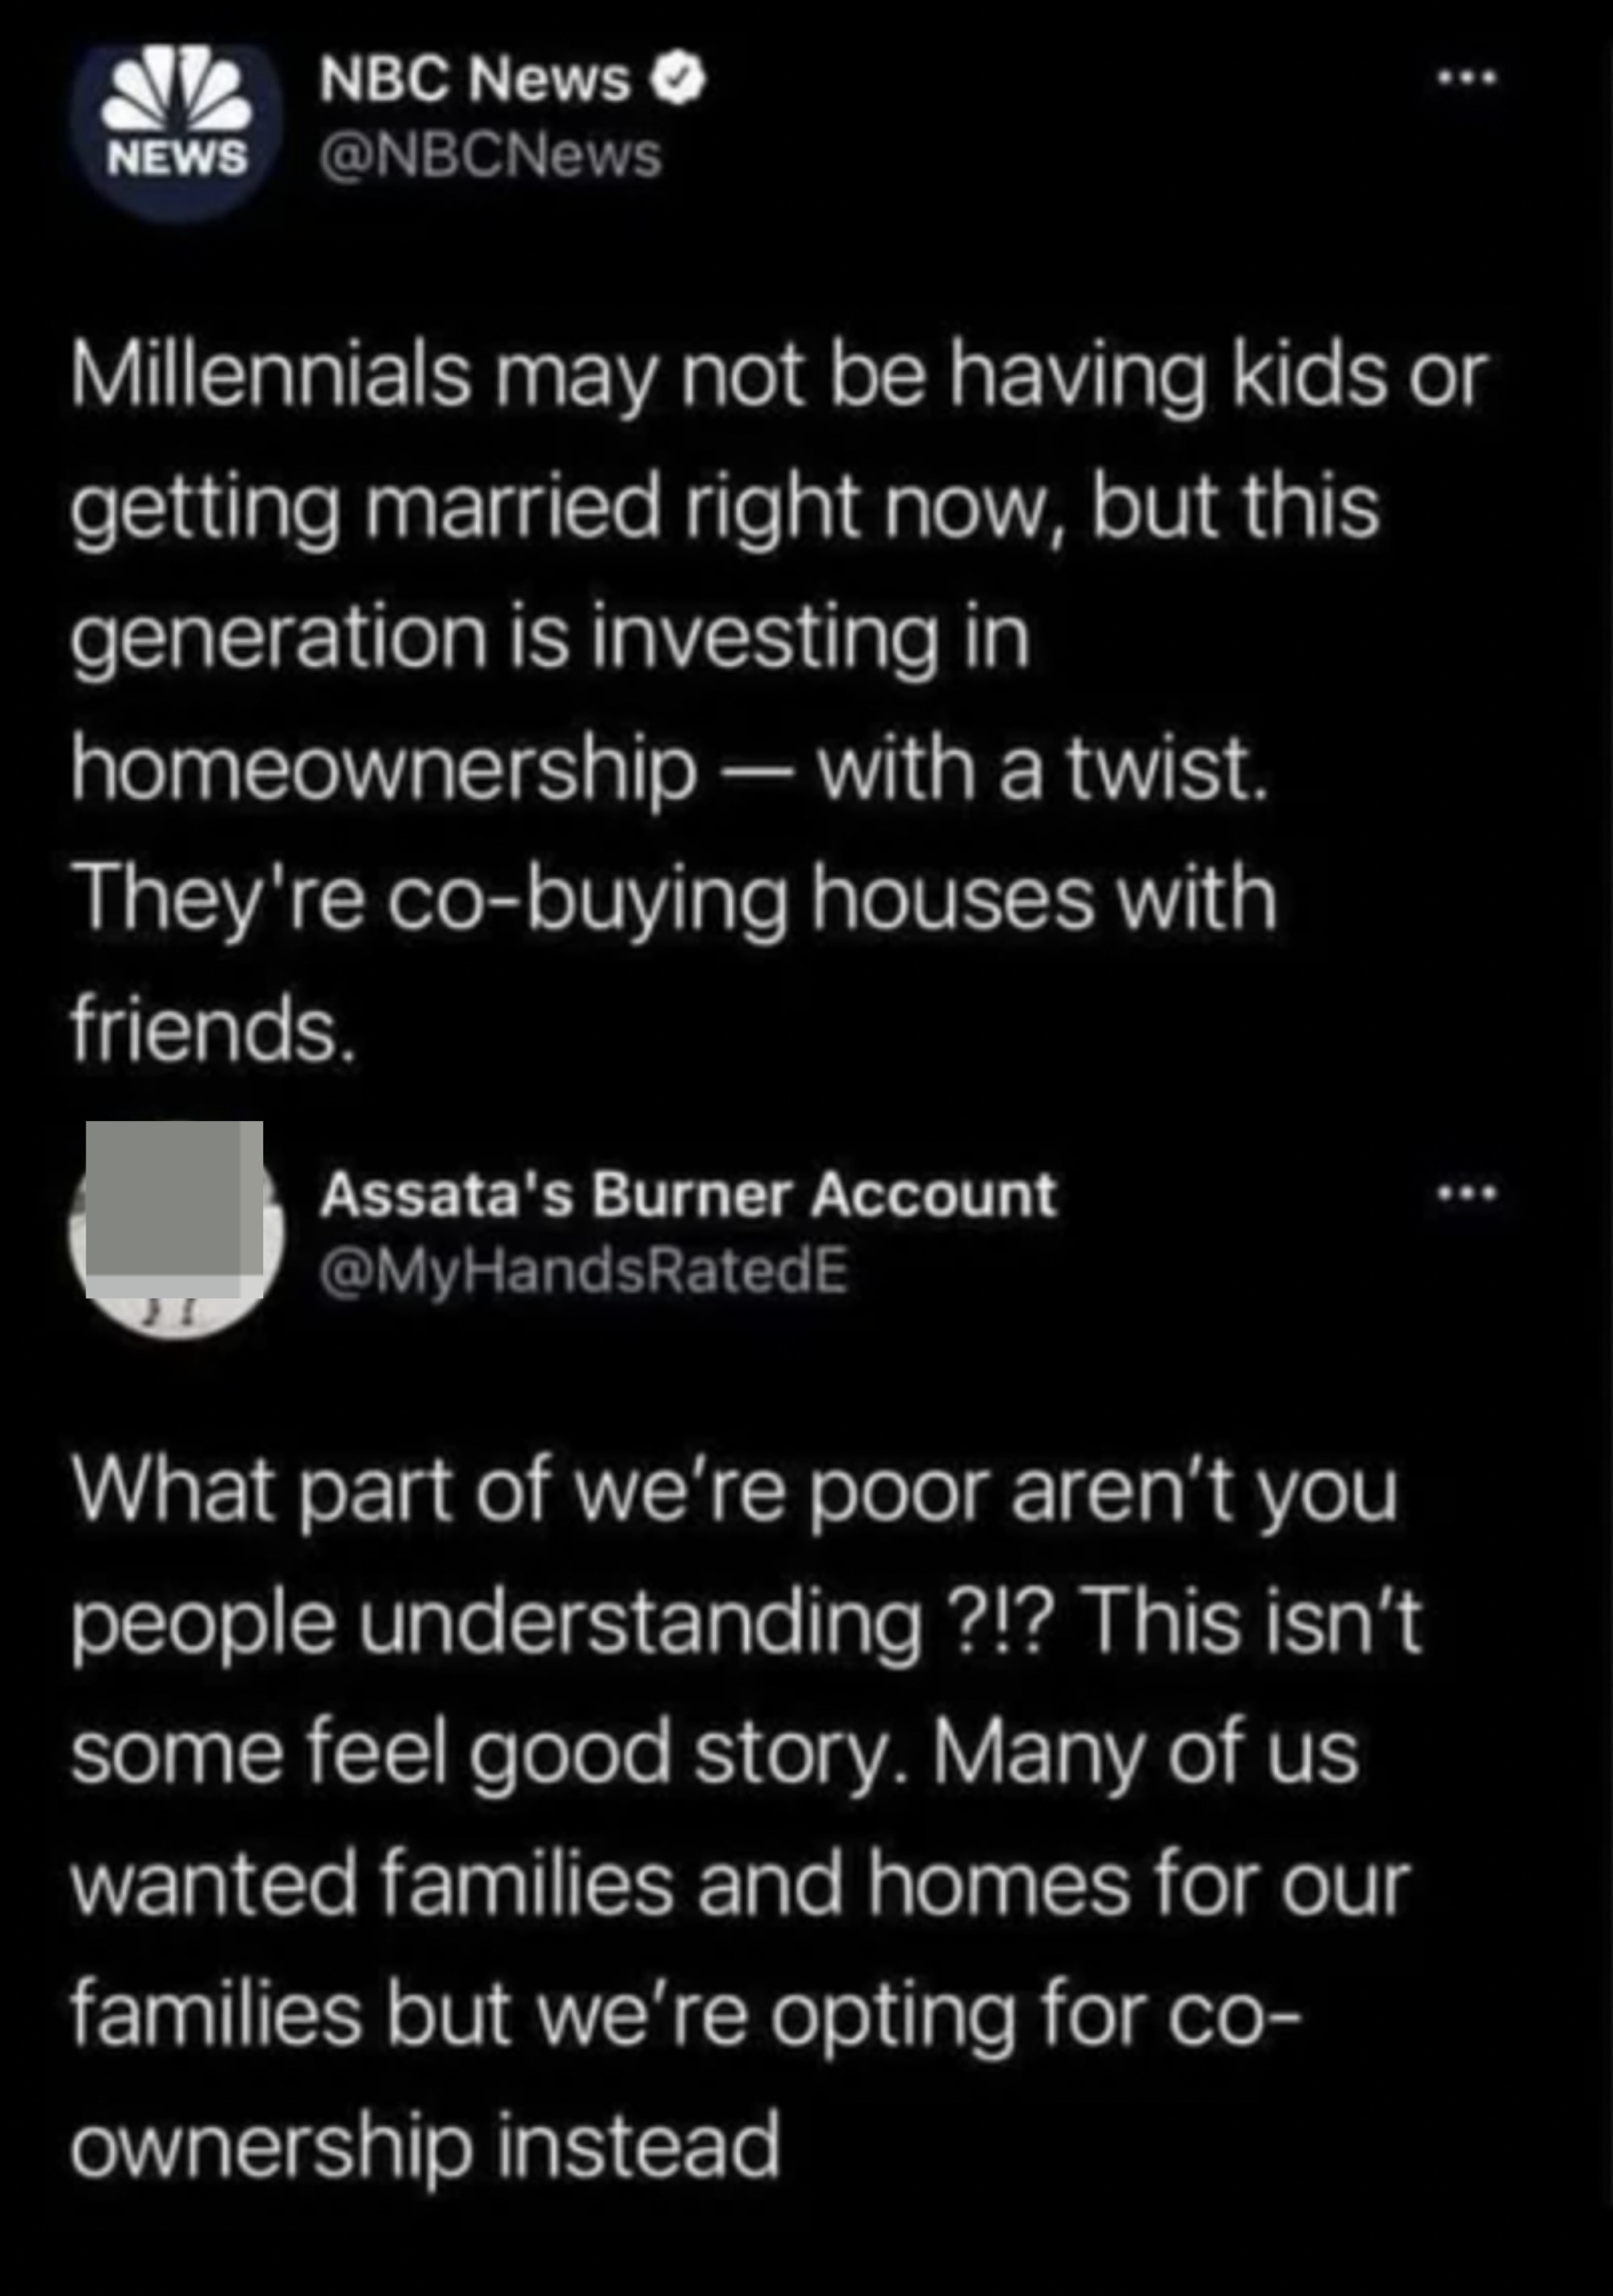 person explaining why millennials are co-buying houses